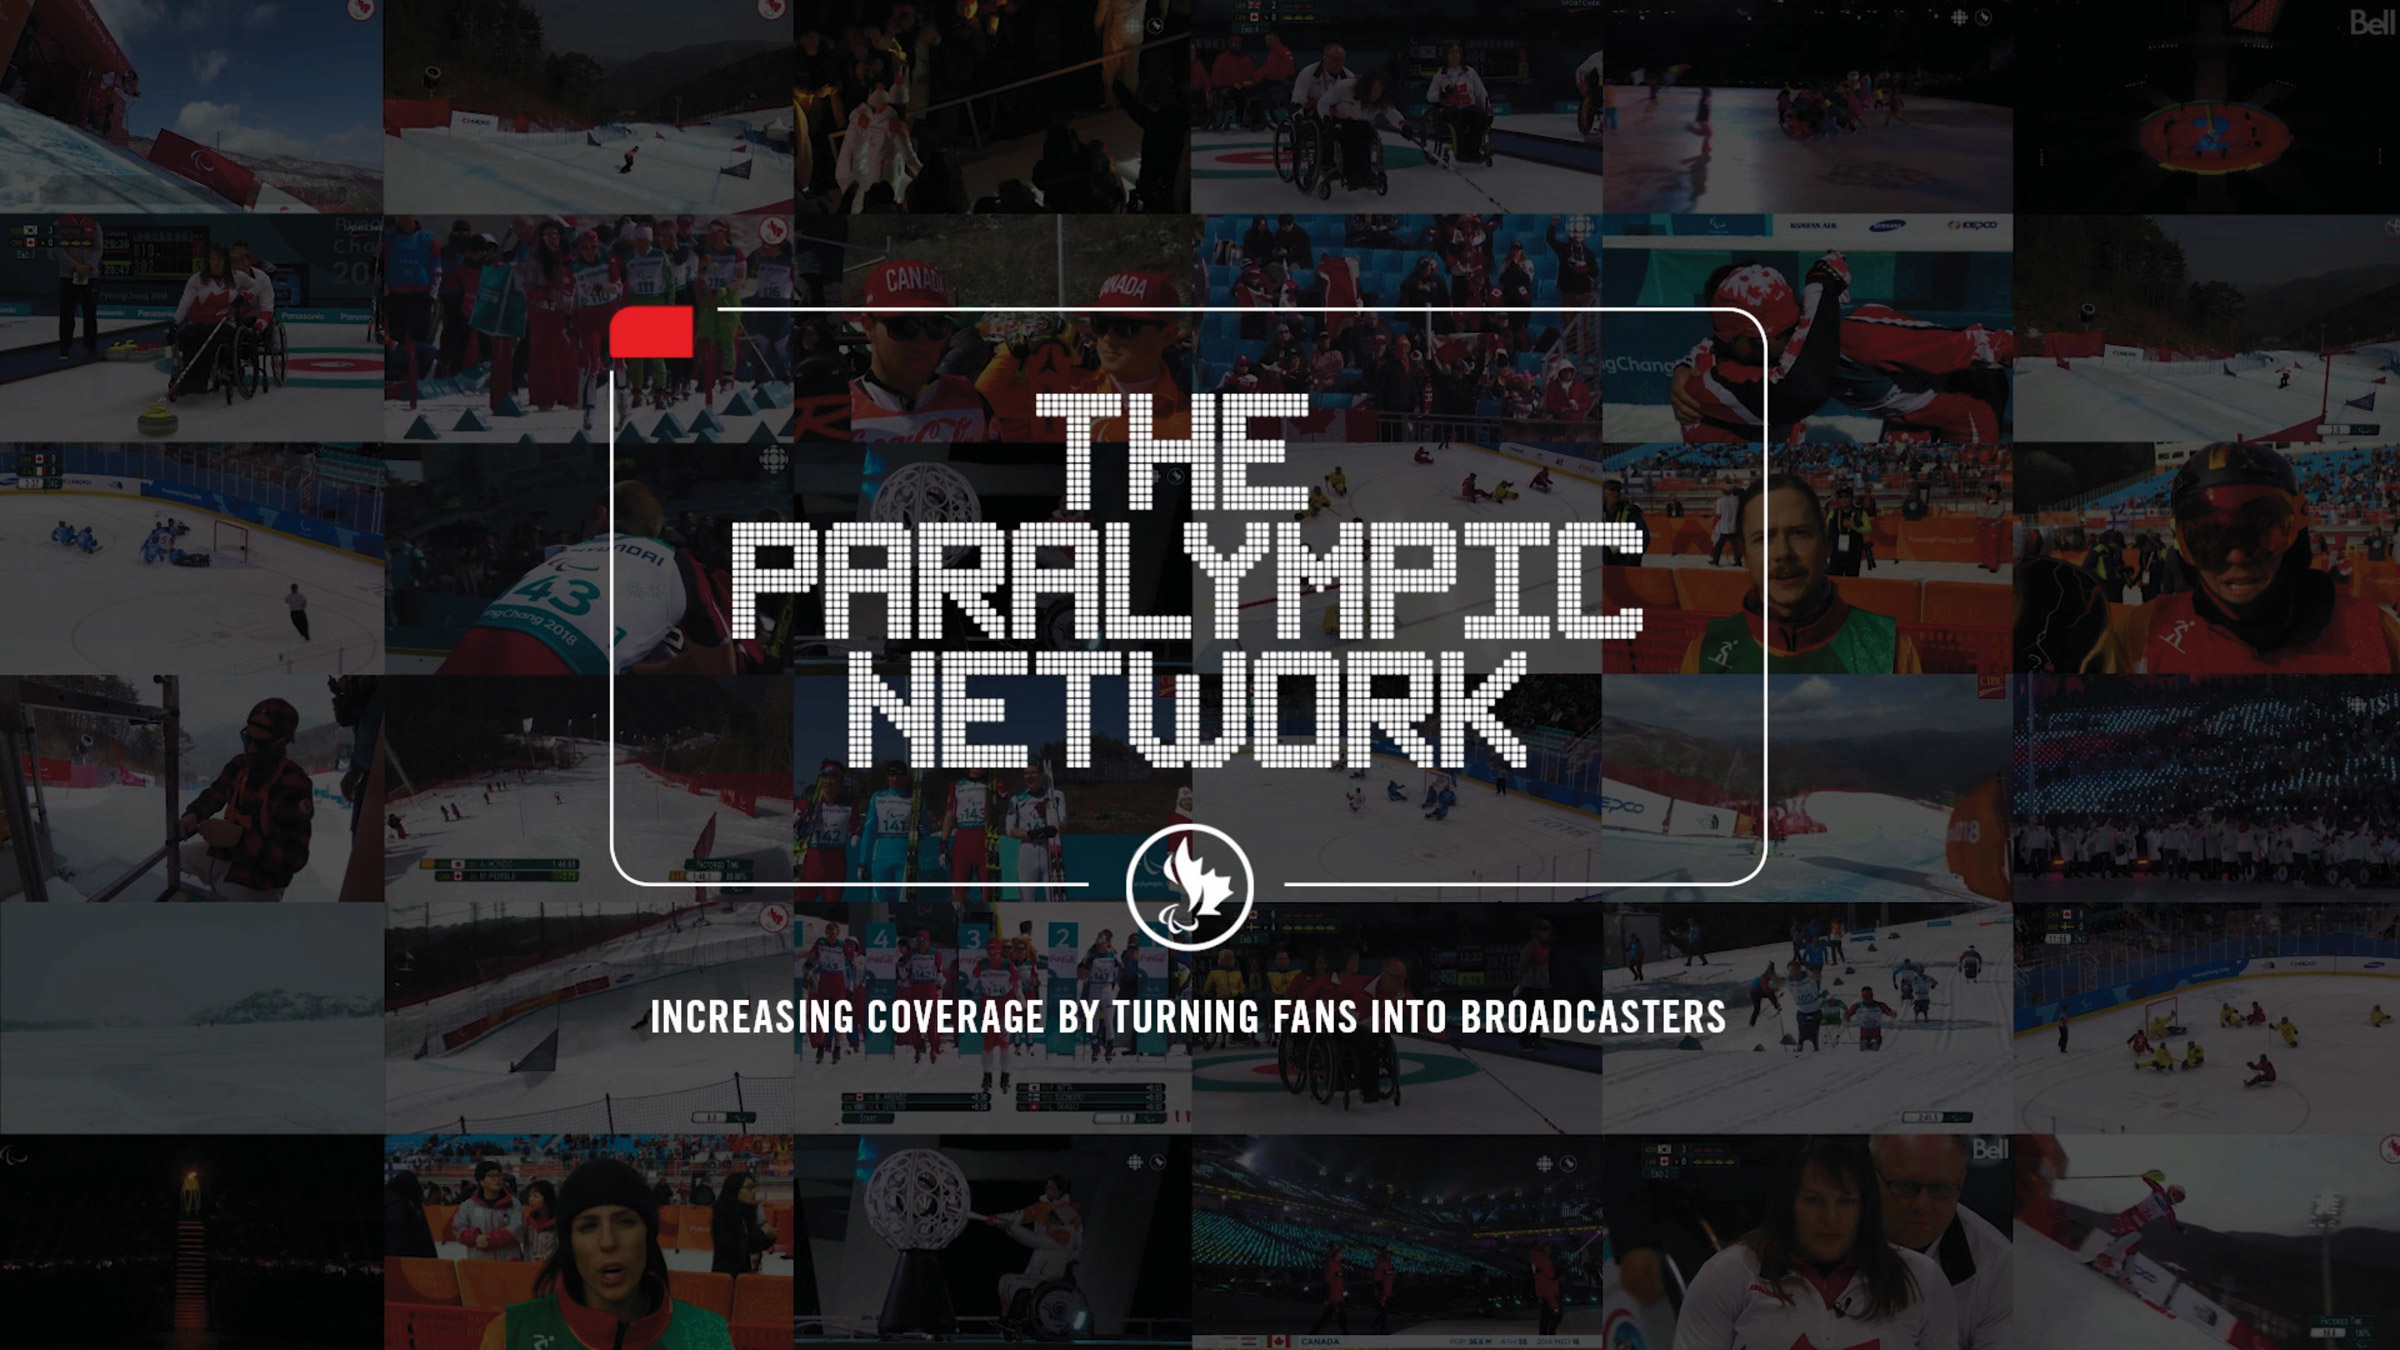 The Paralympic Network